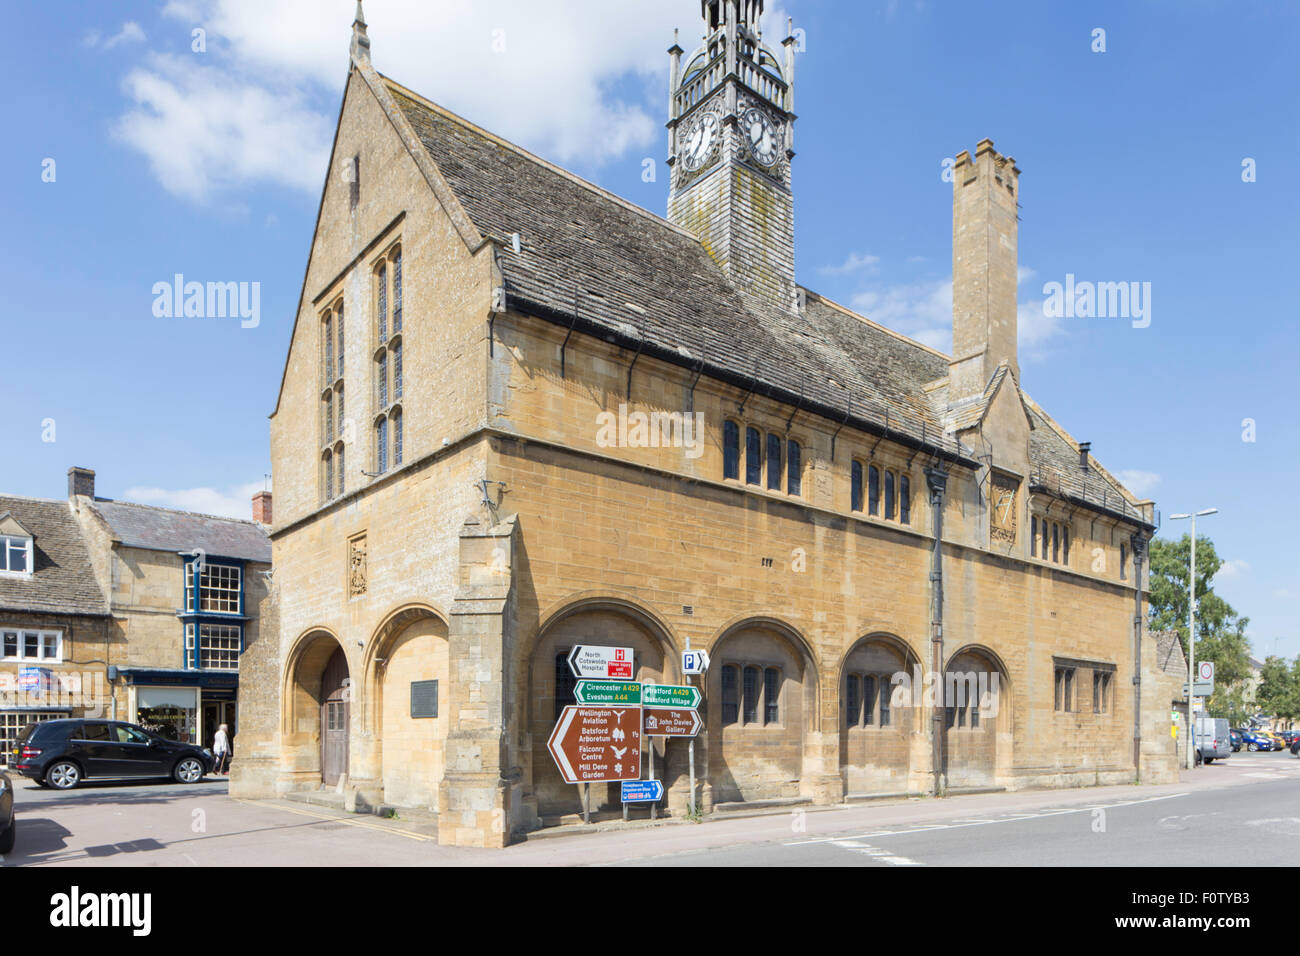 Unattractive road signs against an historic building in Morton in the Marsh, Gloucestershire, England, UK Stock Photo